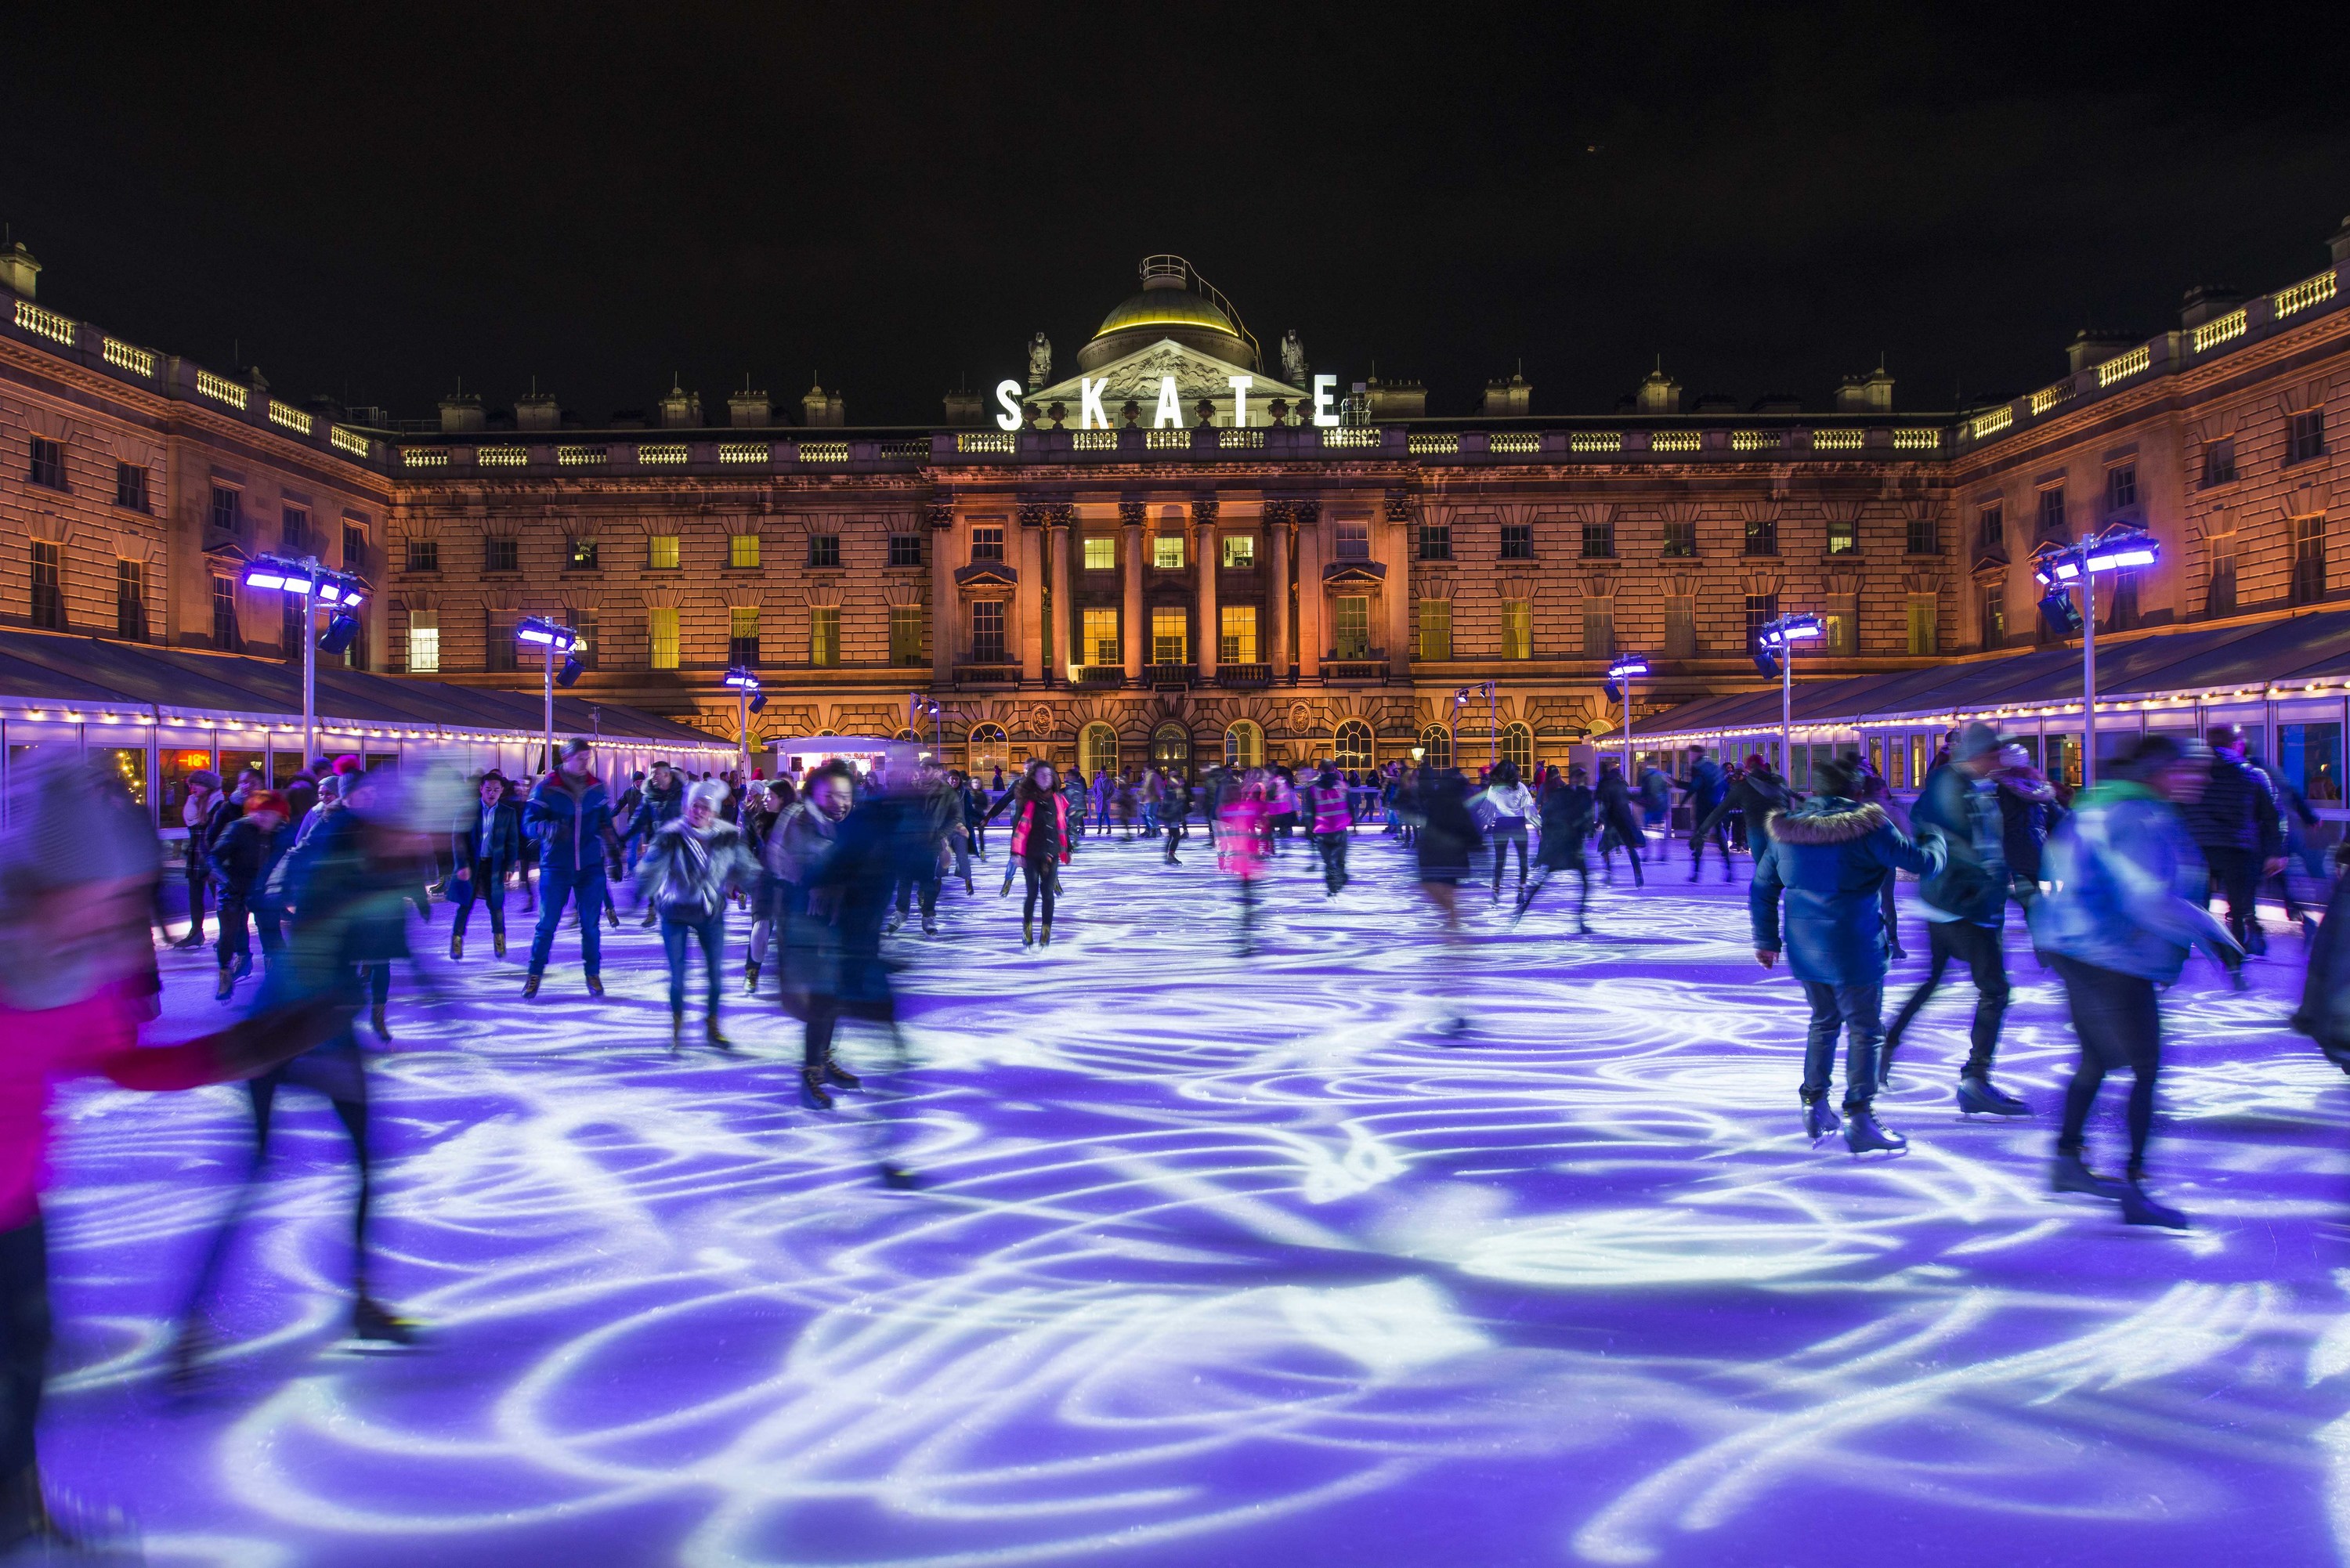 Tickets to Somerset House’s ice rink go on sale THIS WEEK